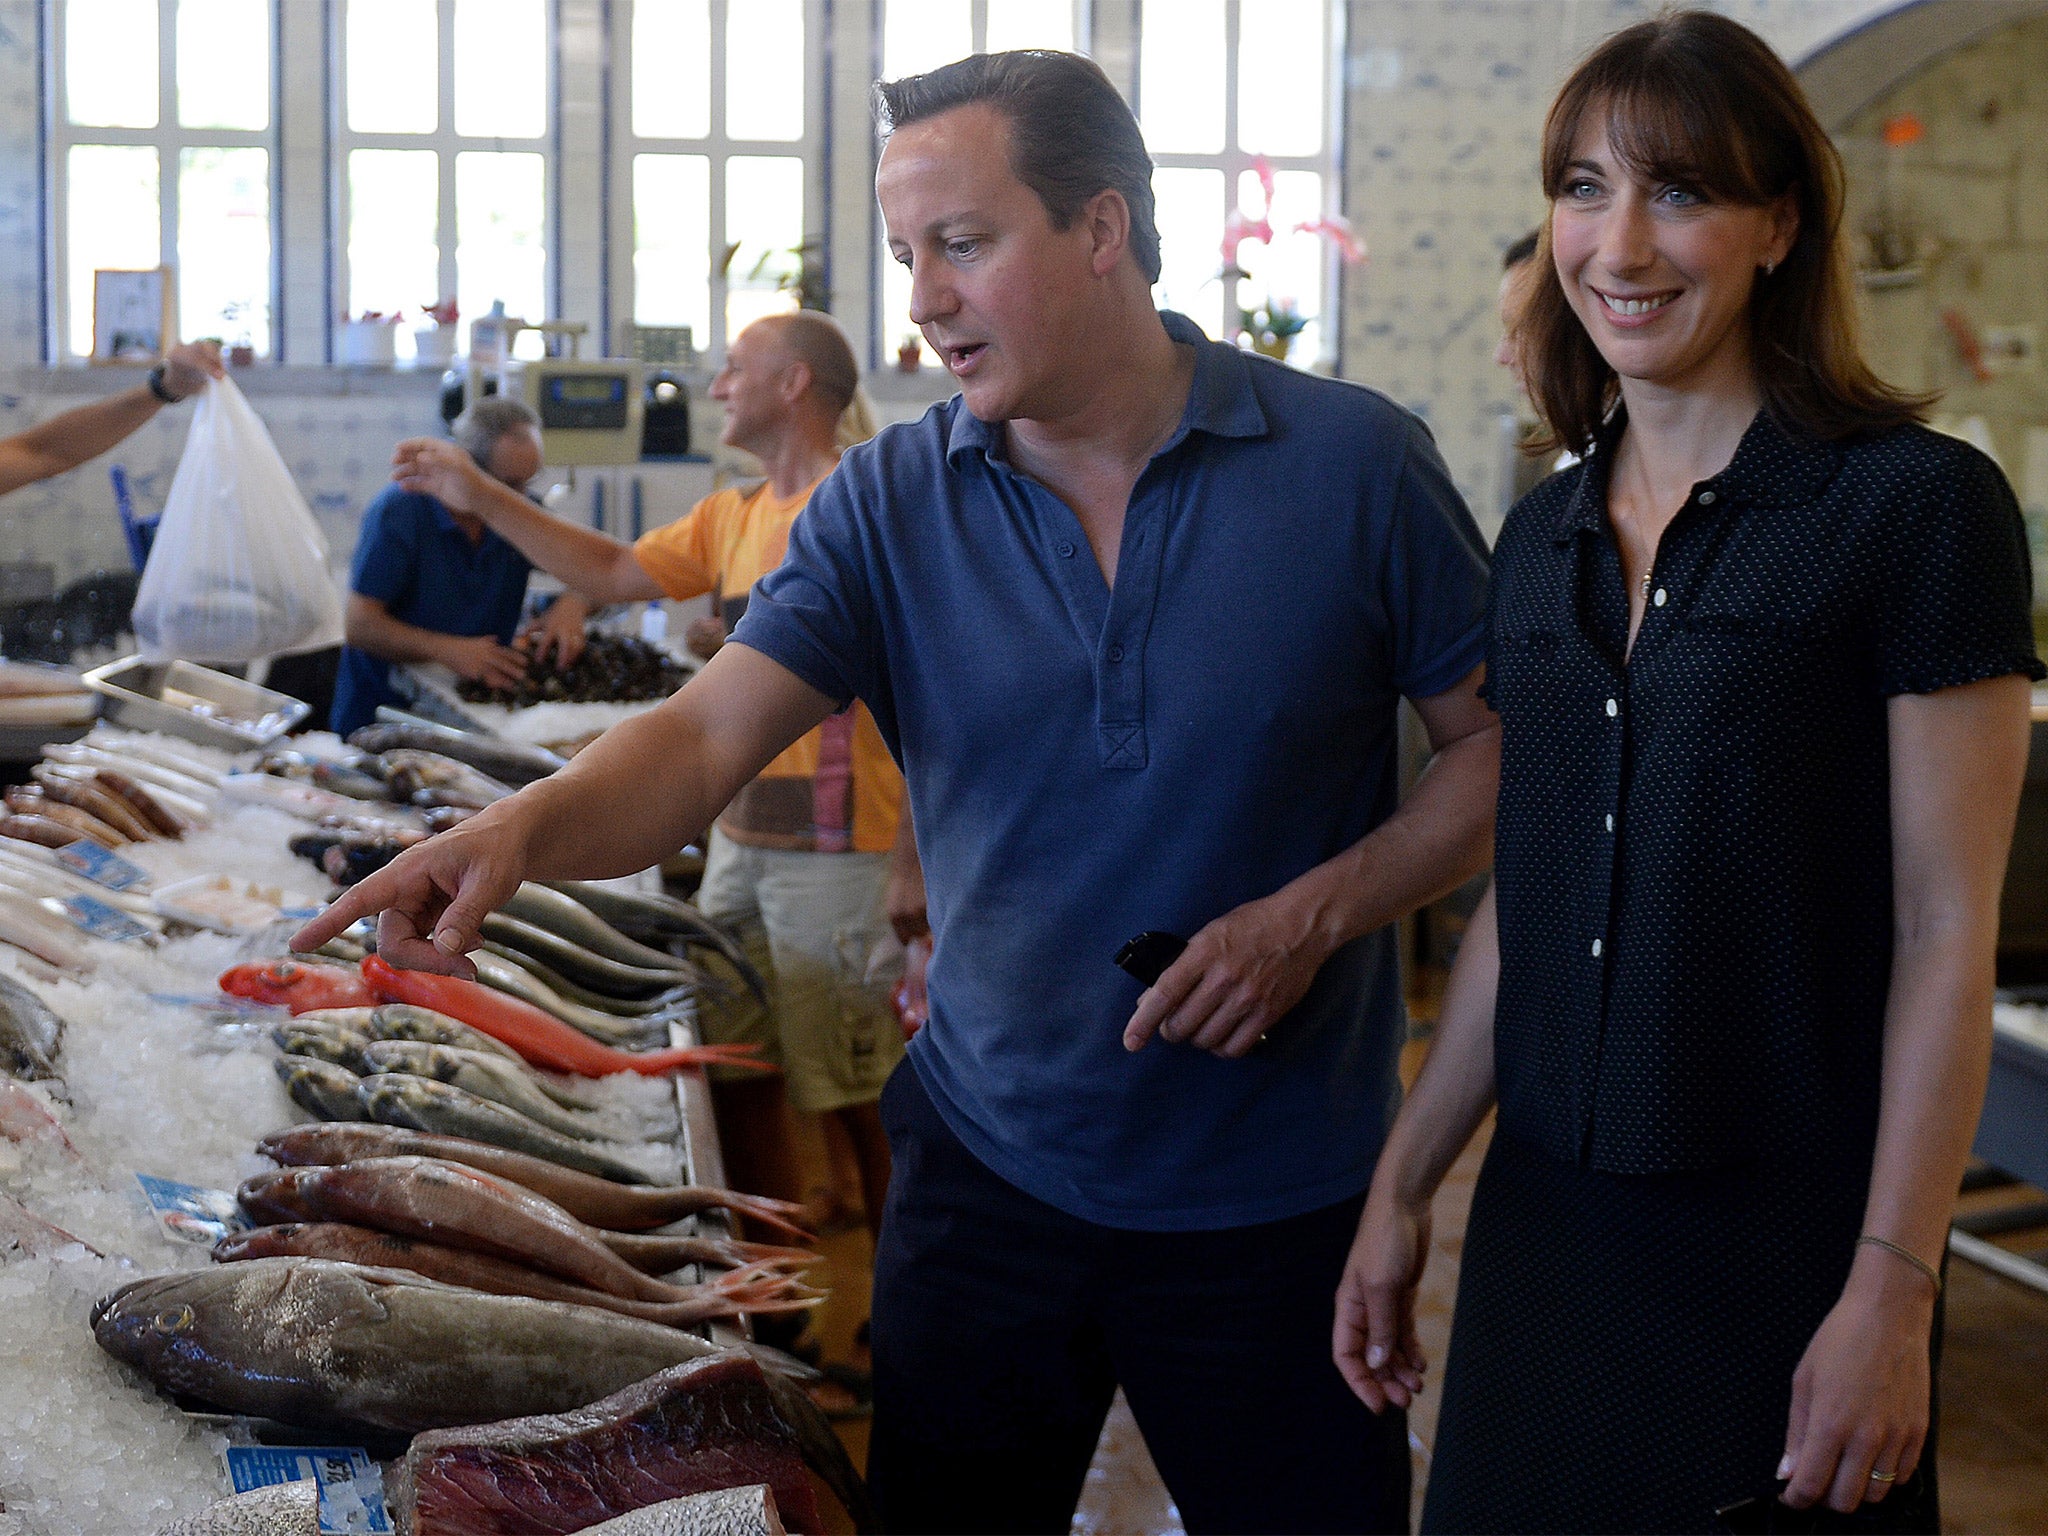 Prime Minister David Cameron and his wife Samantha are pictured as they visit a seafood market in Cascais in Portugal, on August 5, 2014